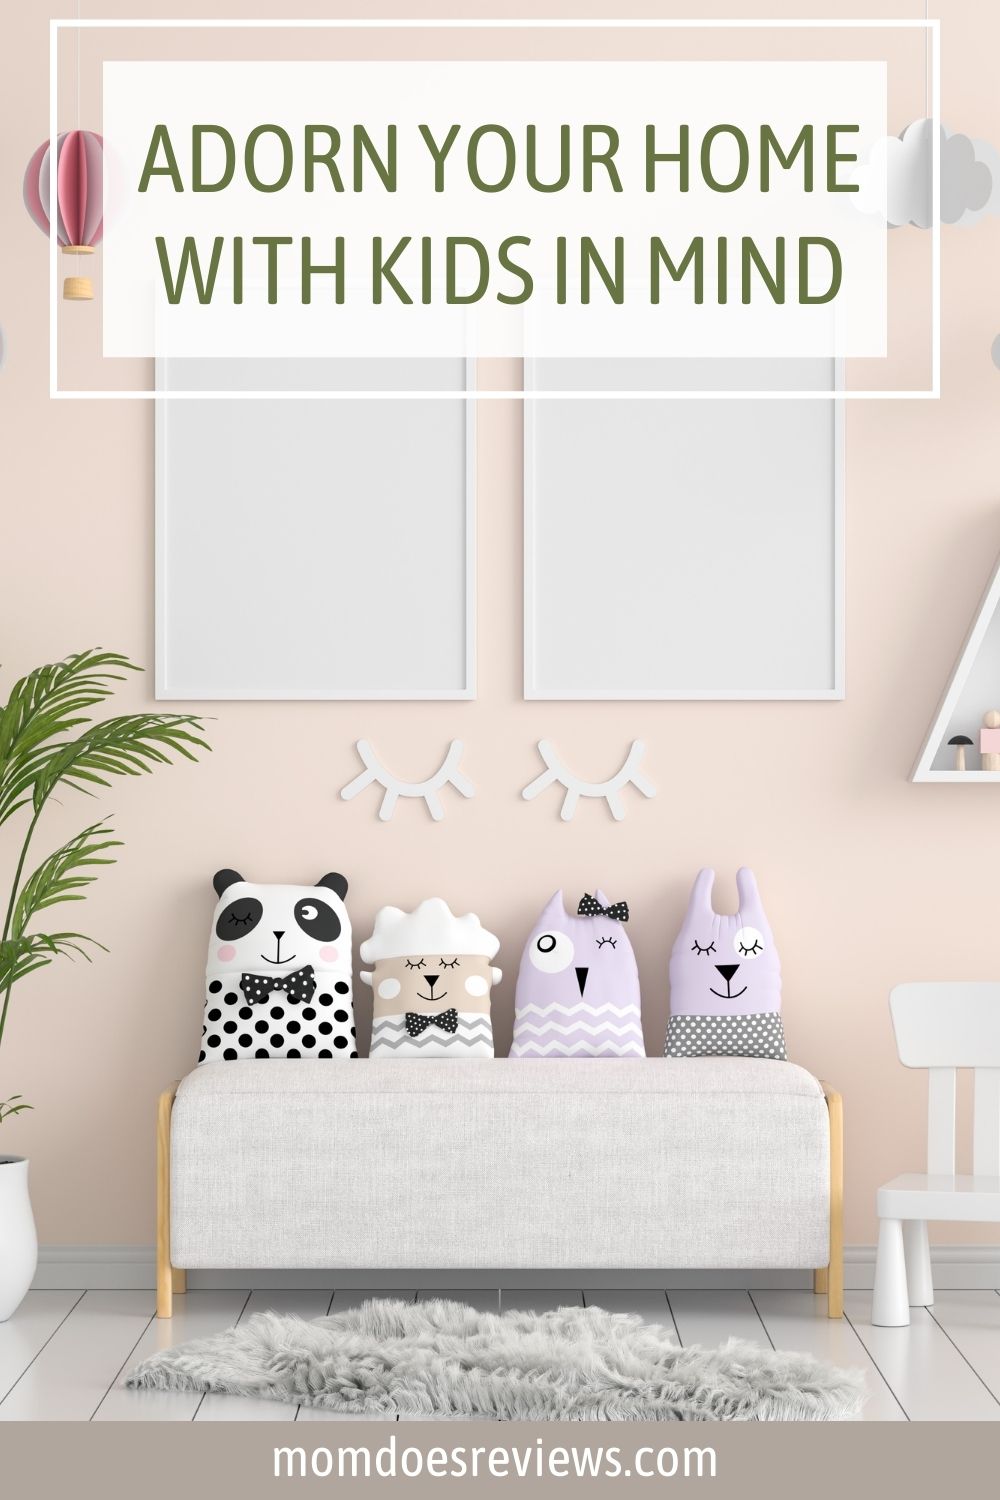 5 Ways to Adorn Your Home With Kids In Mind